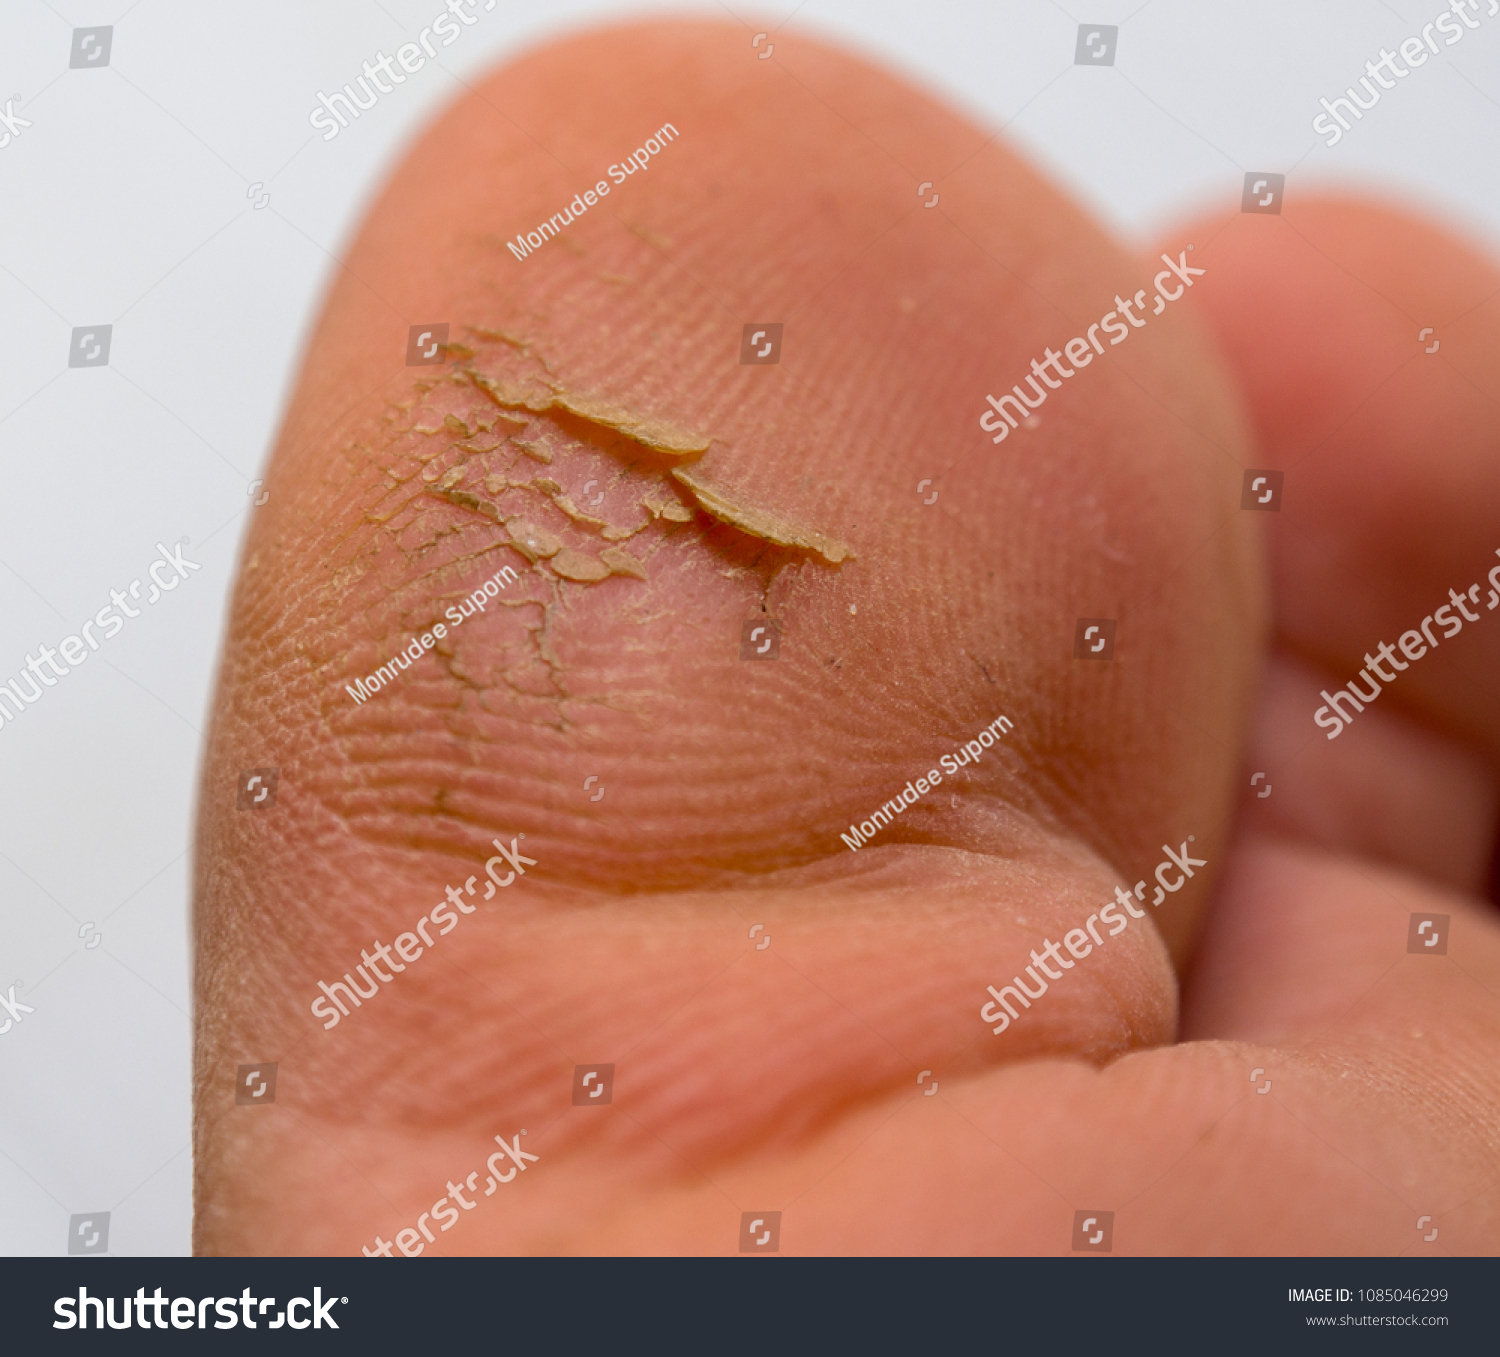 cracked toes